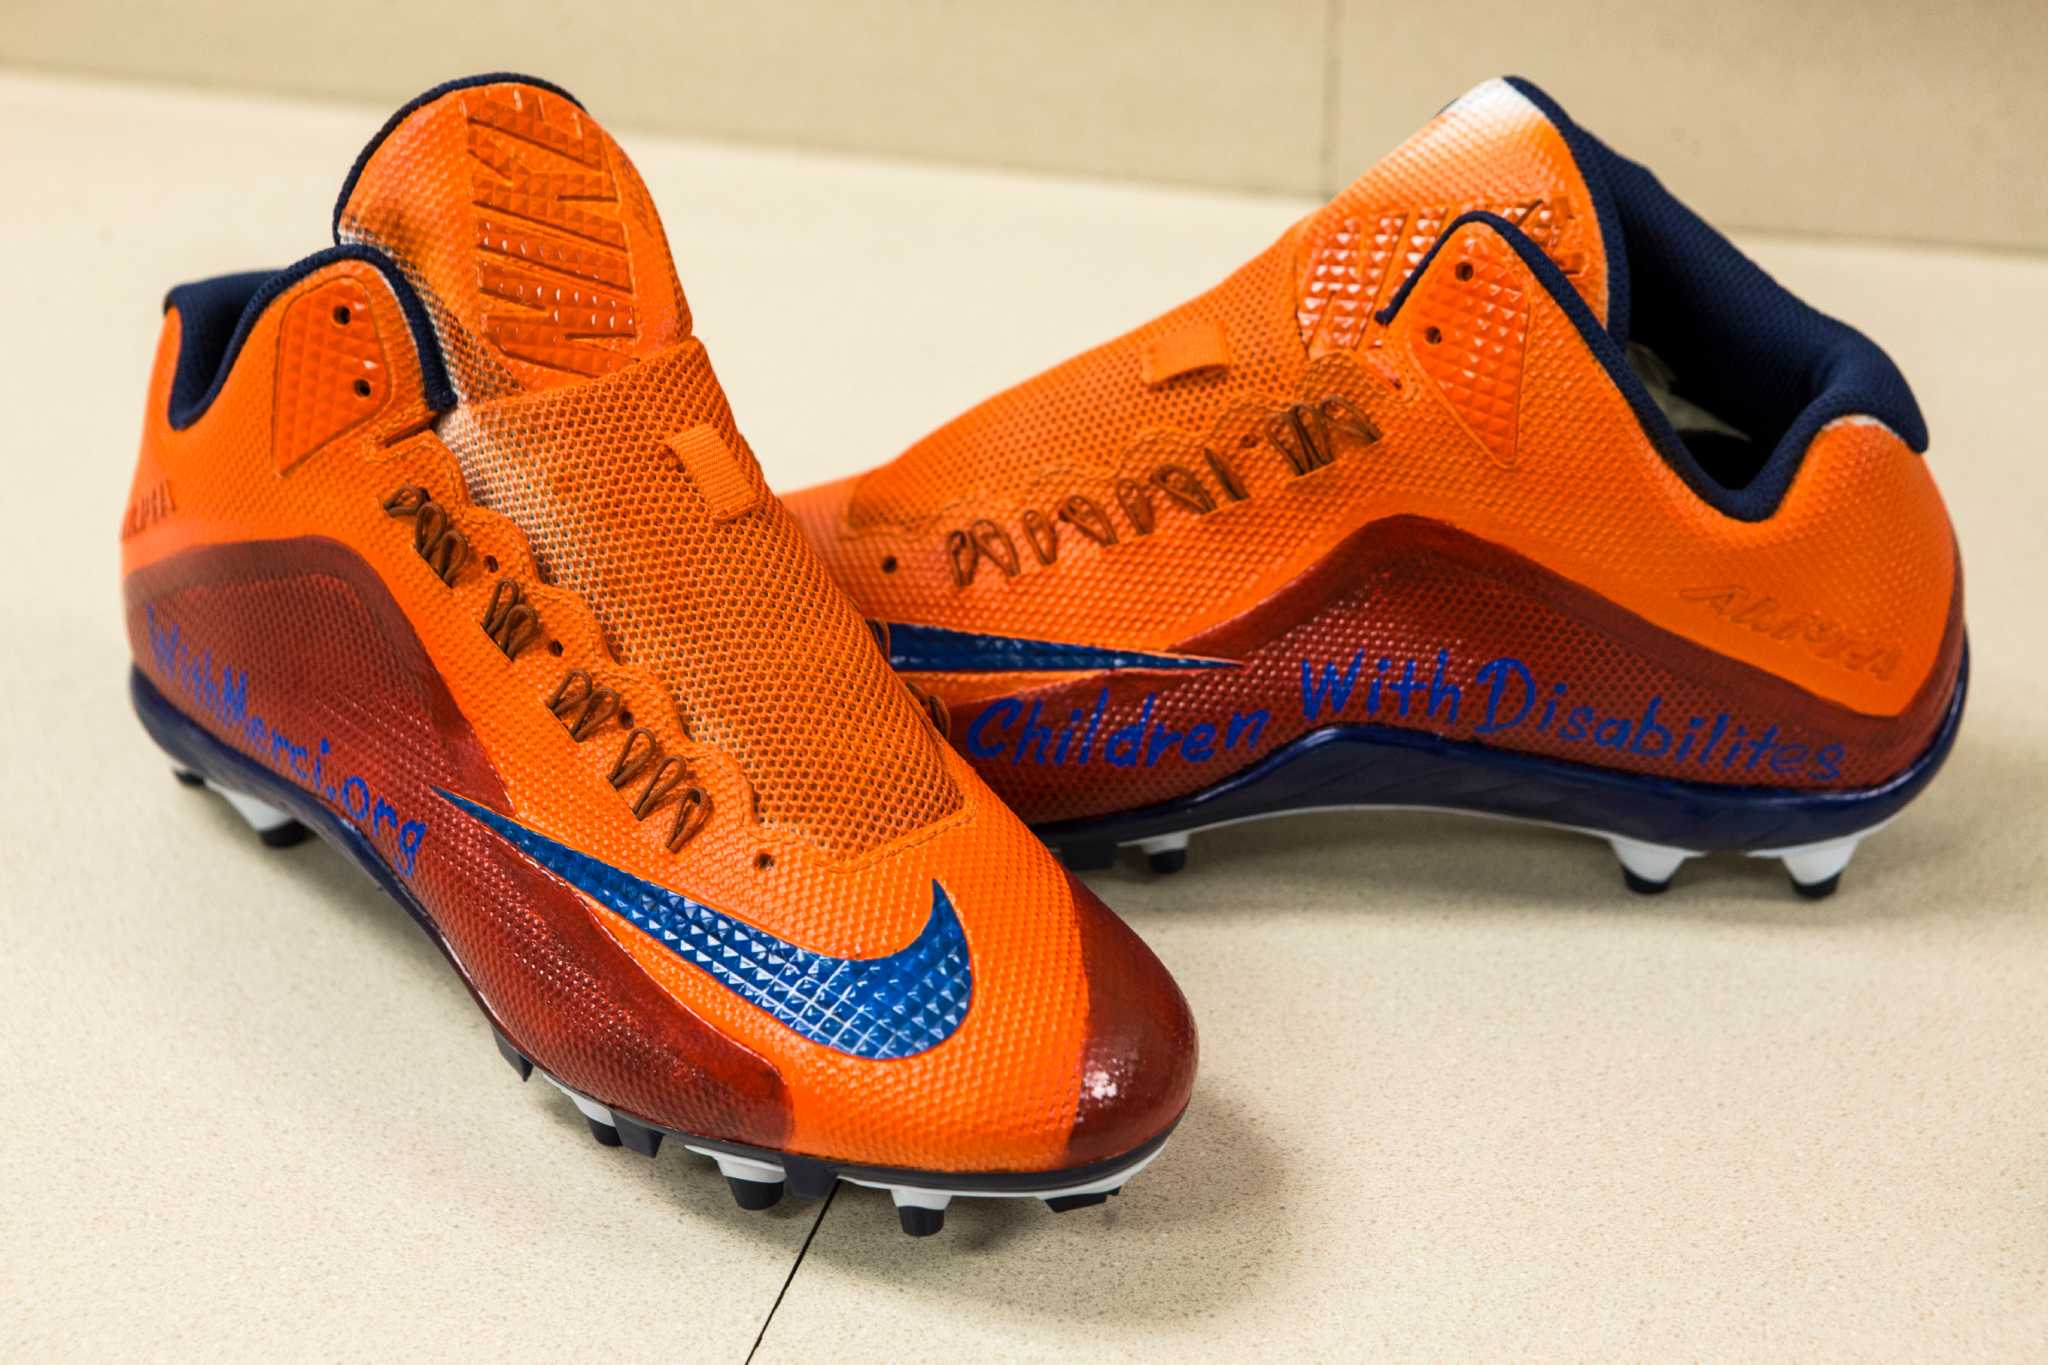 Cowboys speciality cleats will raise awareness for various